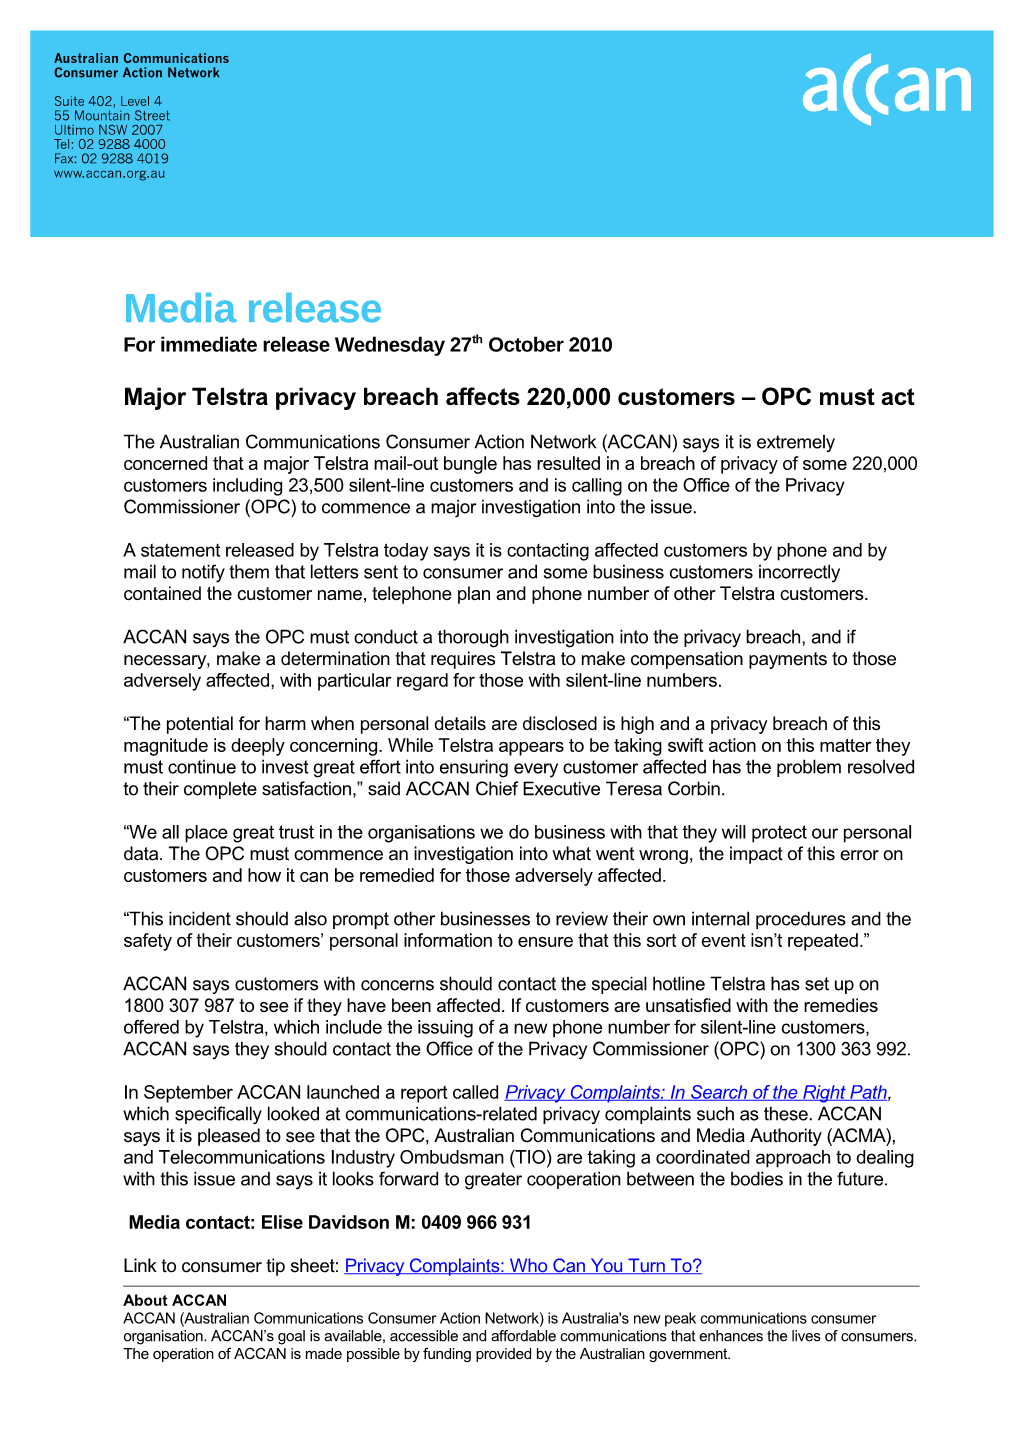 Major Telstra Privacy Breach Affects 220,000 Customers OPC Must Act